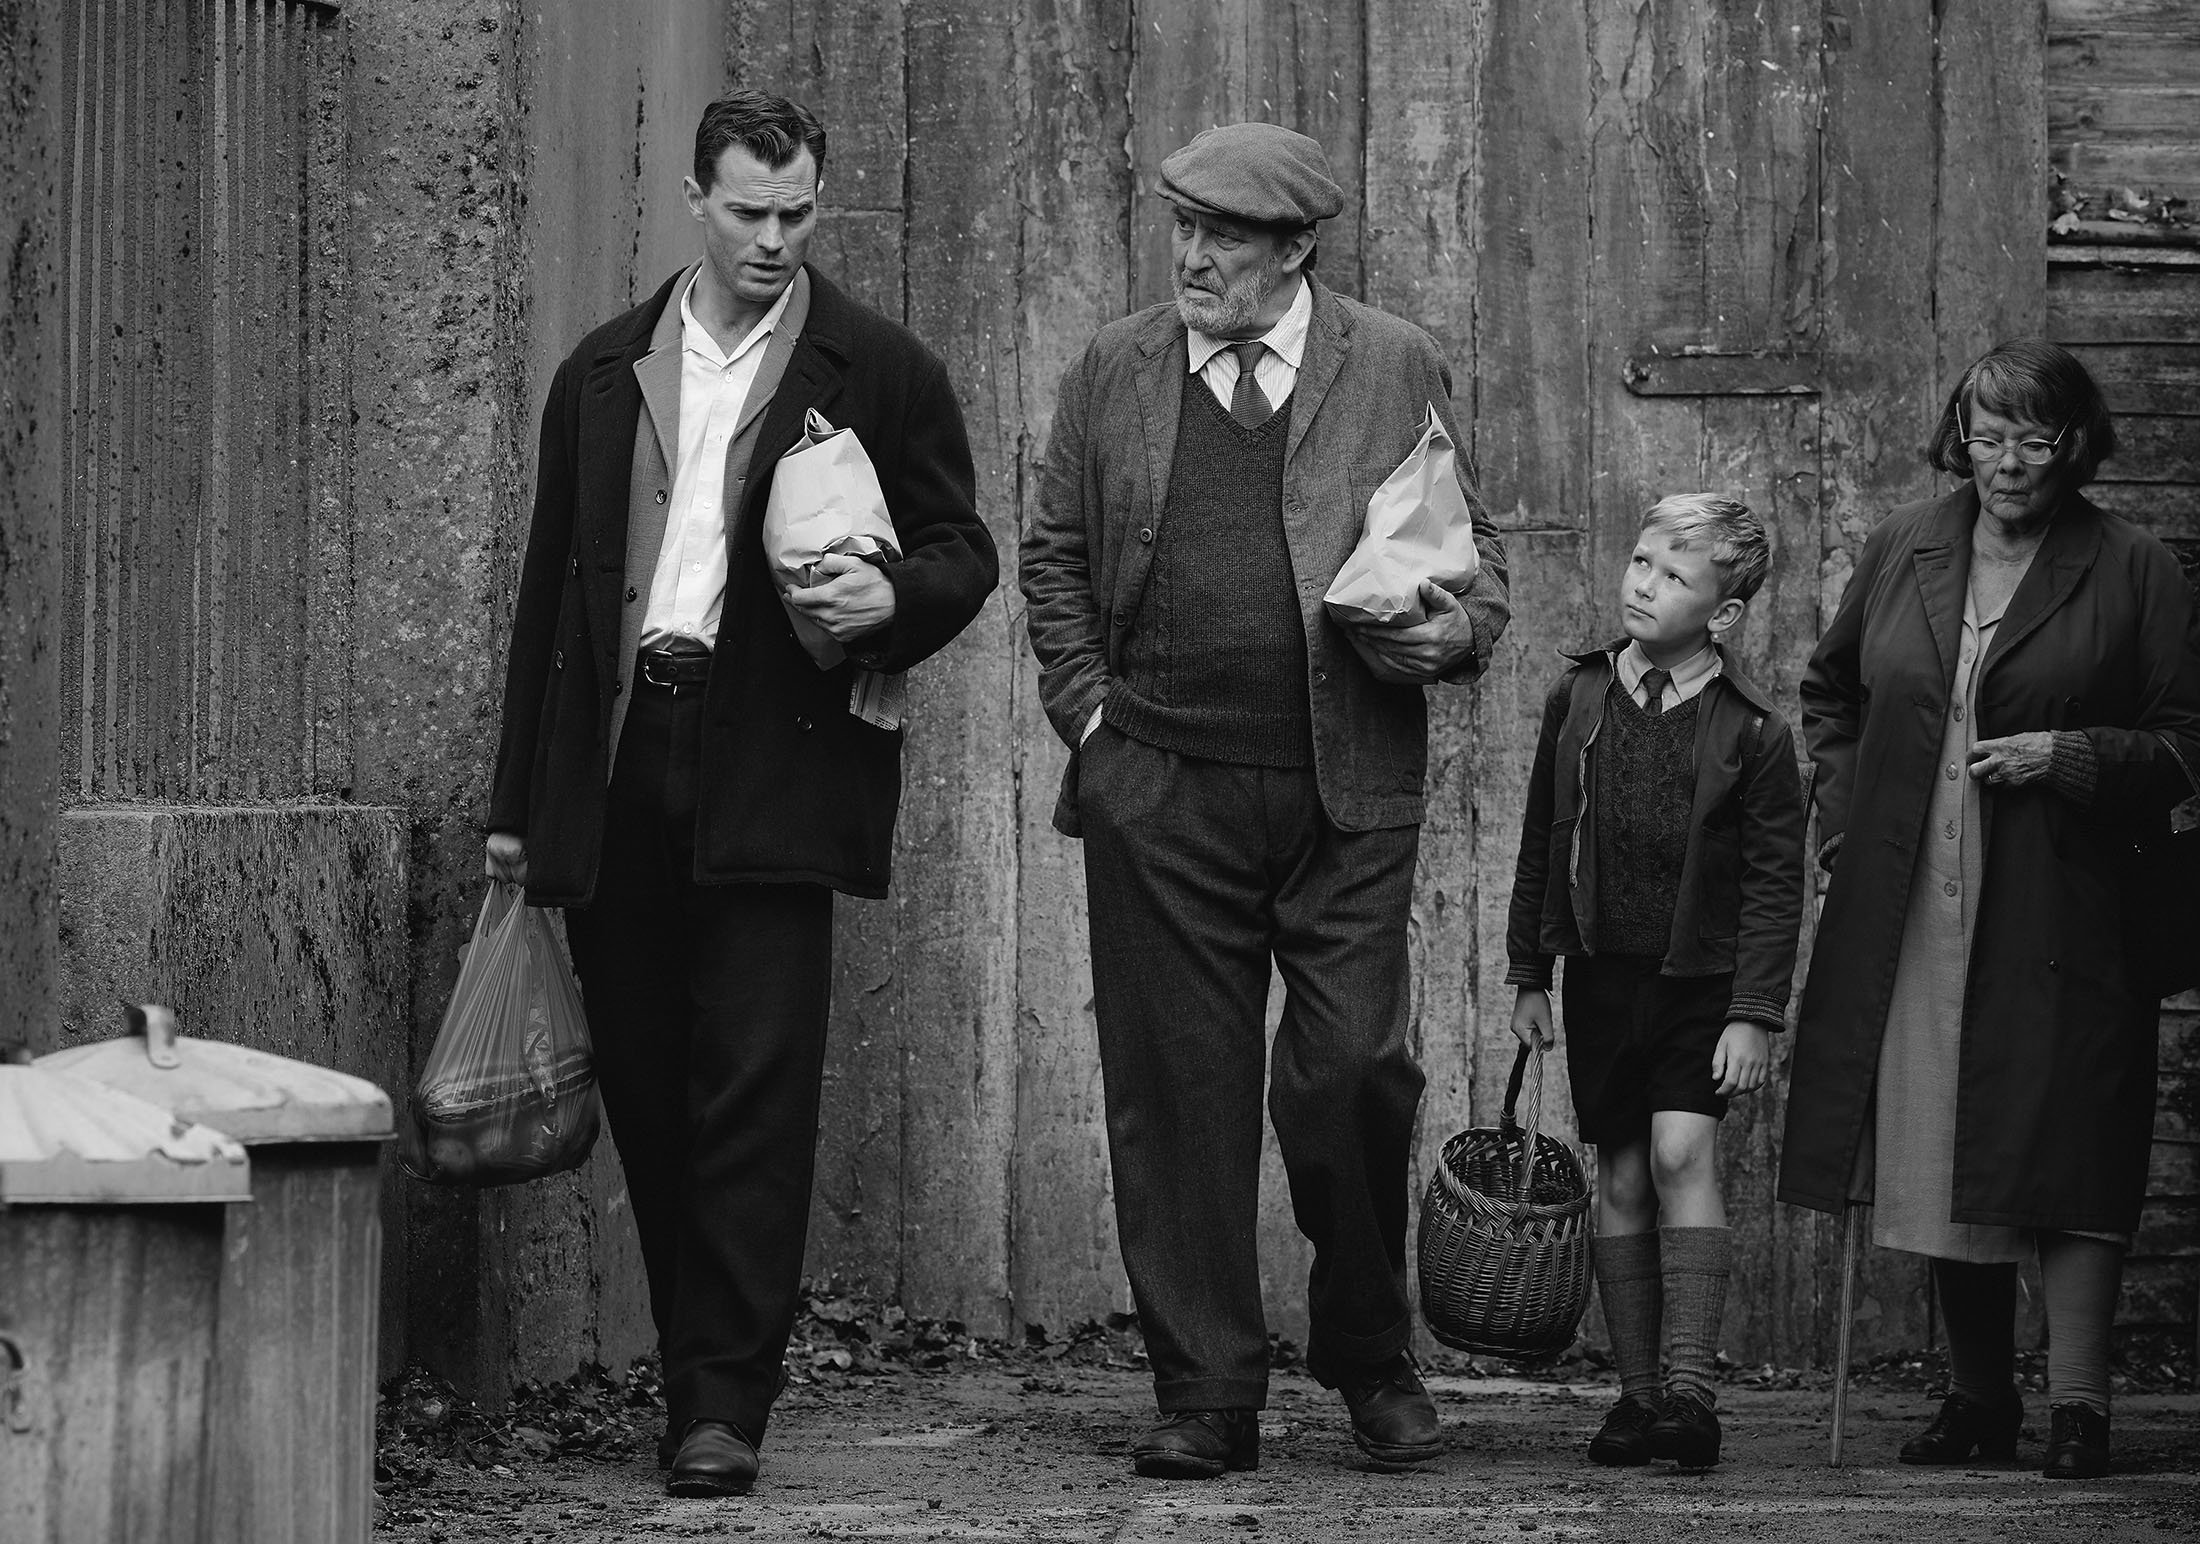 Jamie Dornan (L), Ciaran Hinds (C-L), Jude Hill (C-R) and Judi Dench, in a scene from the film “Belfast.” (Focus Features via AP)